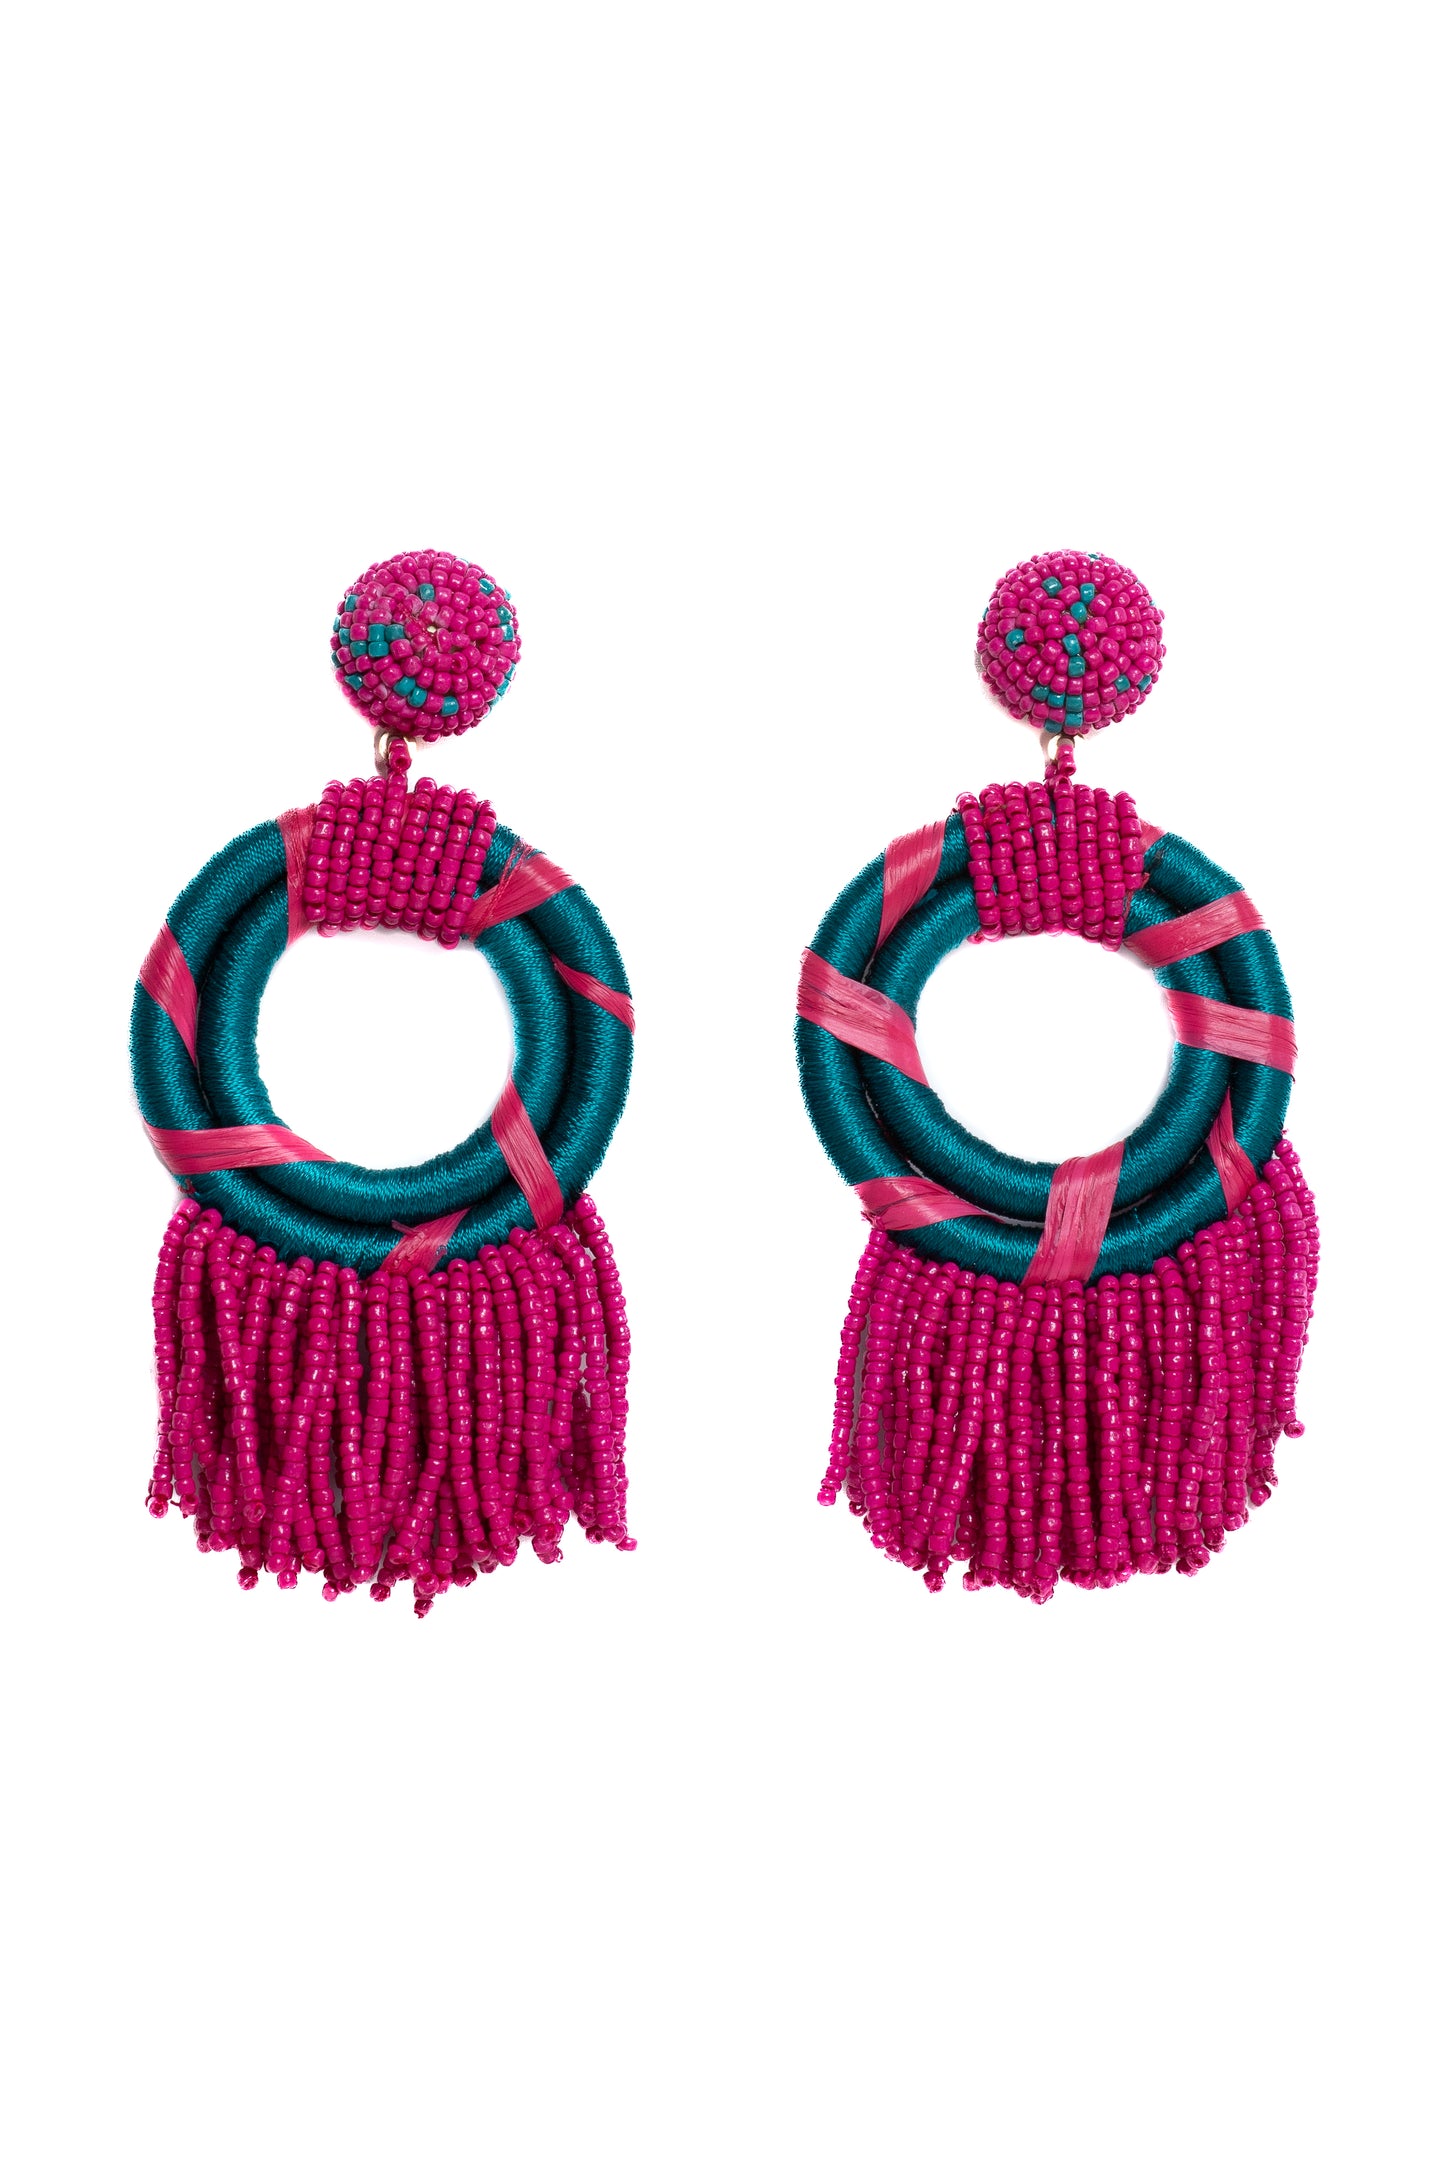 Dream Catcher Pair of Earrings Blue and Pink